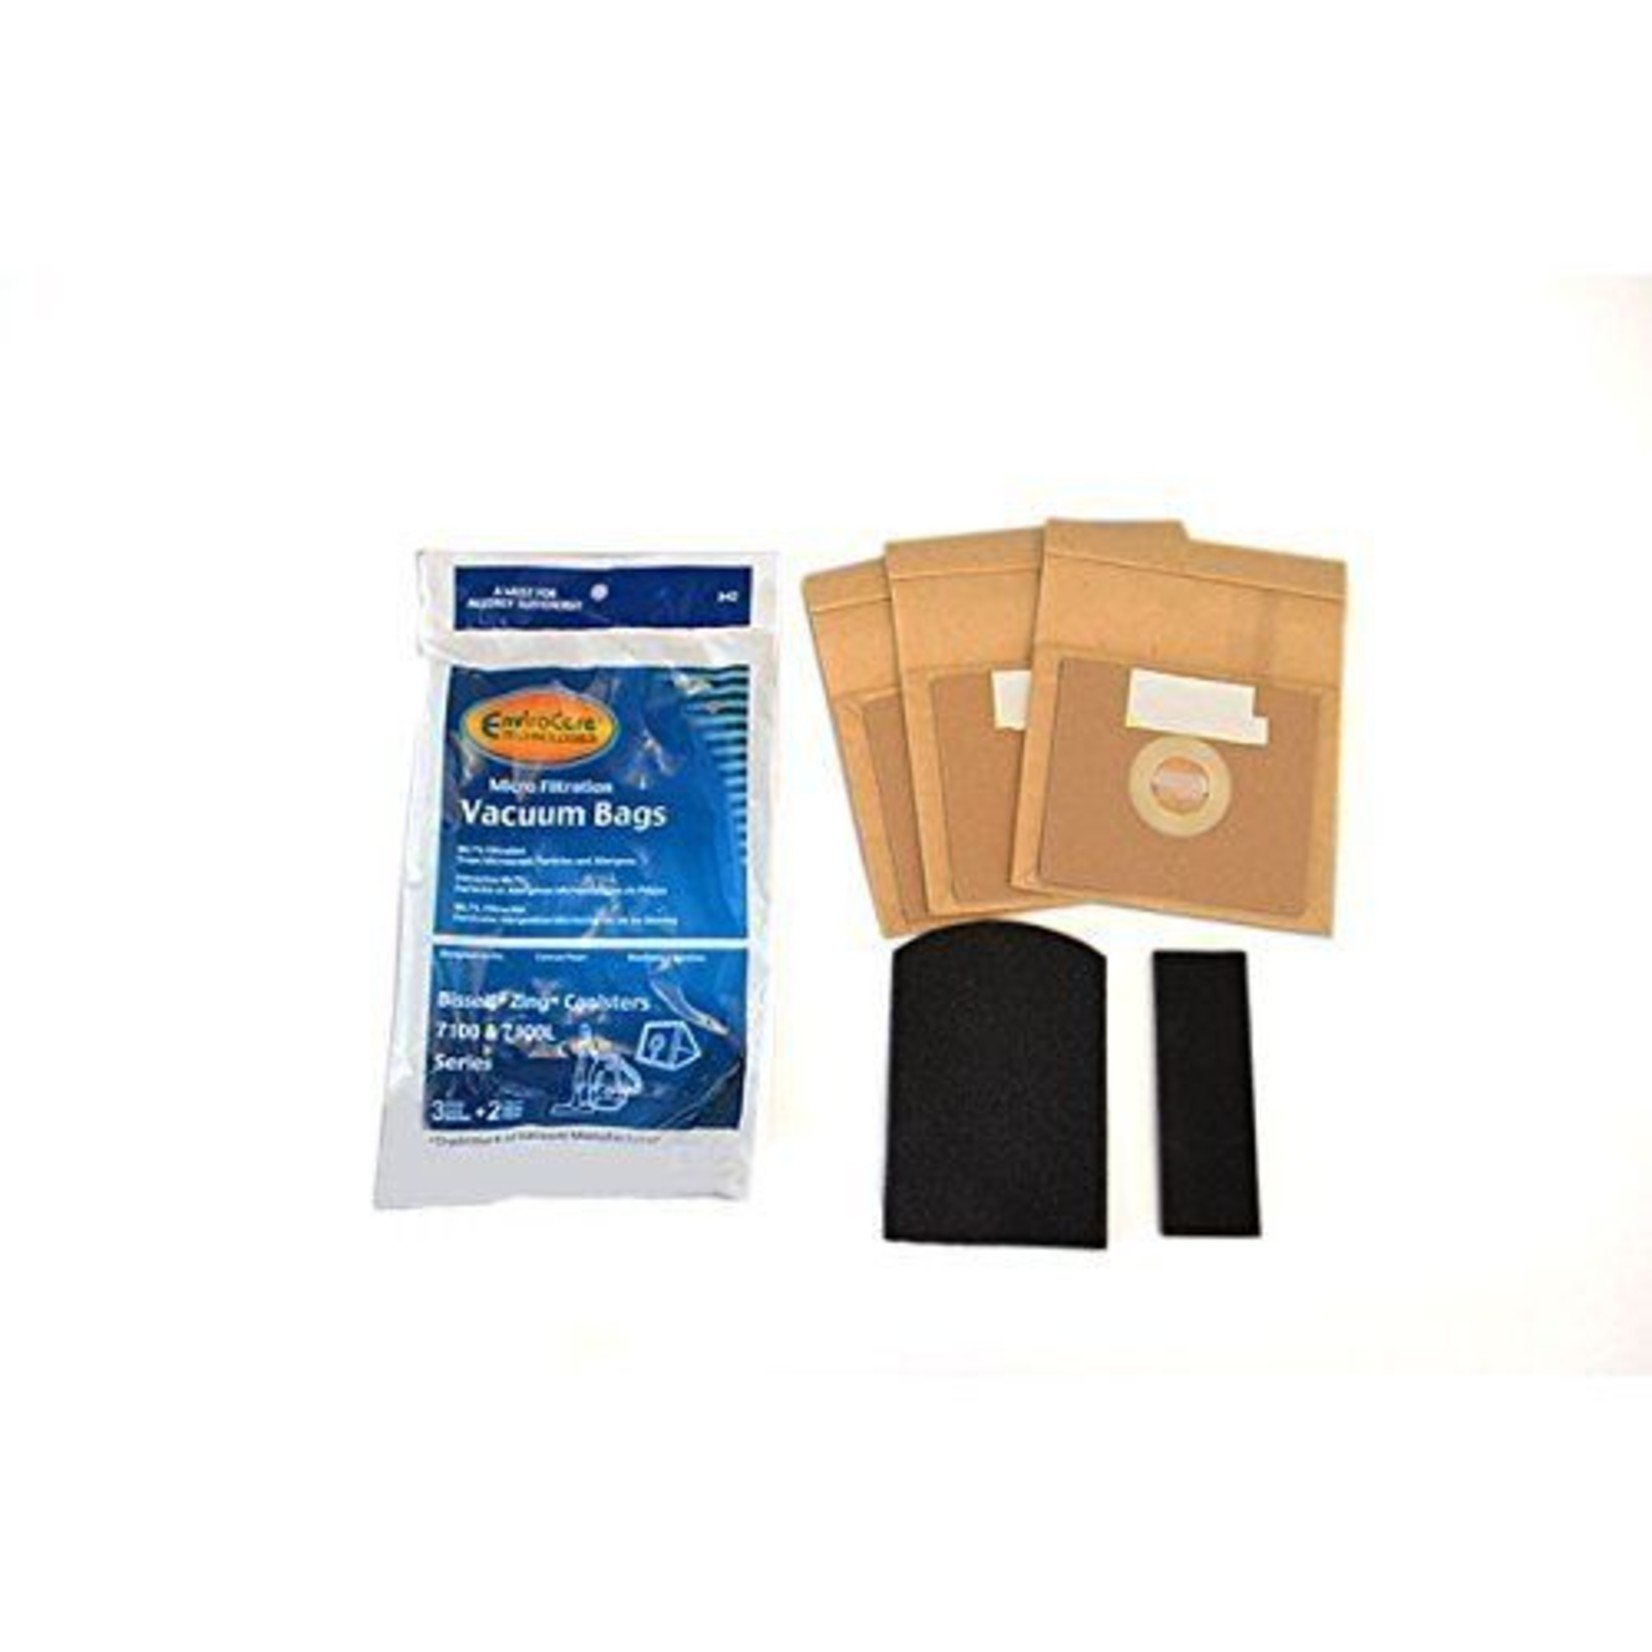 Bissell Bissell Zing 7100 Series Bag (3pk) + Filter Set **NO LONGER AVAILABLE**